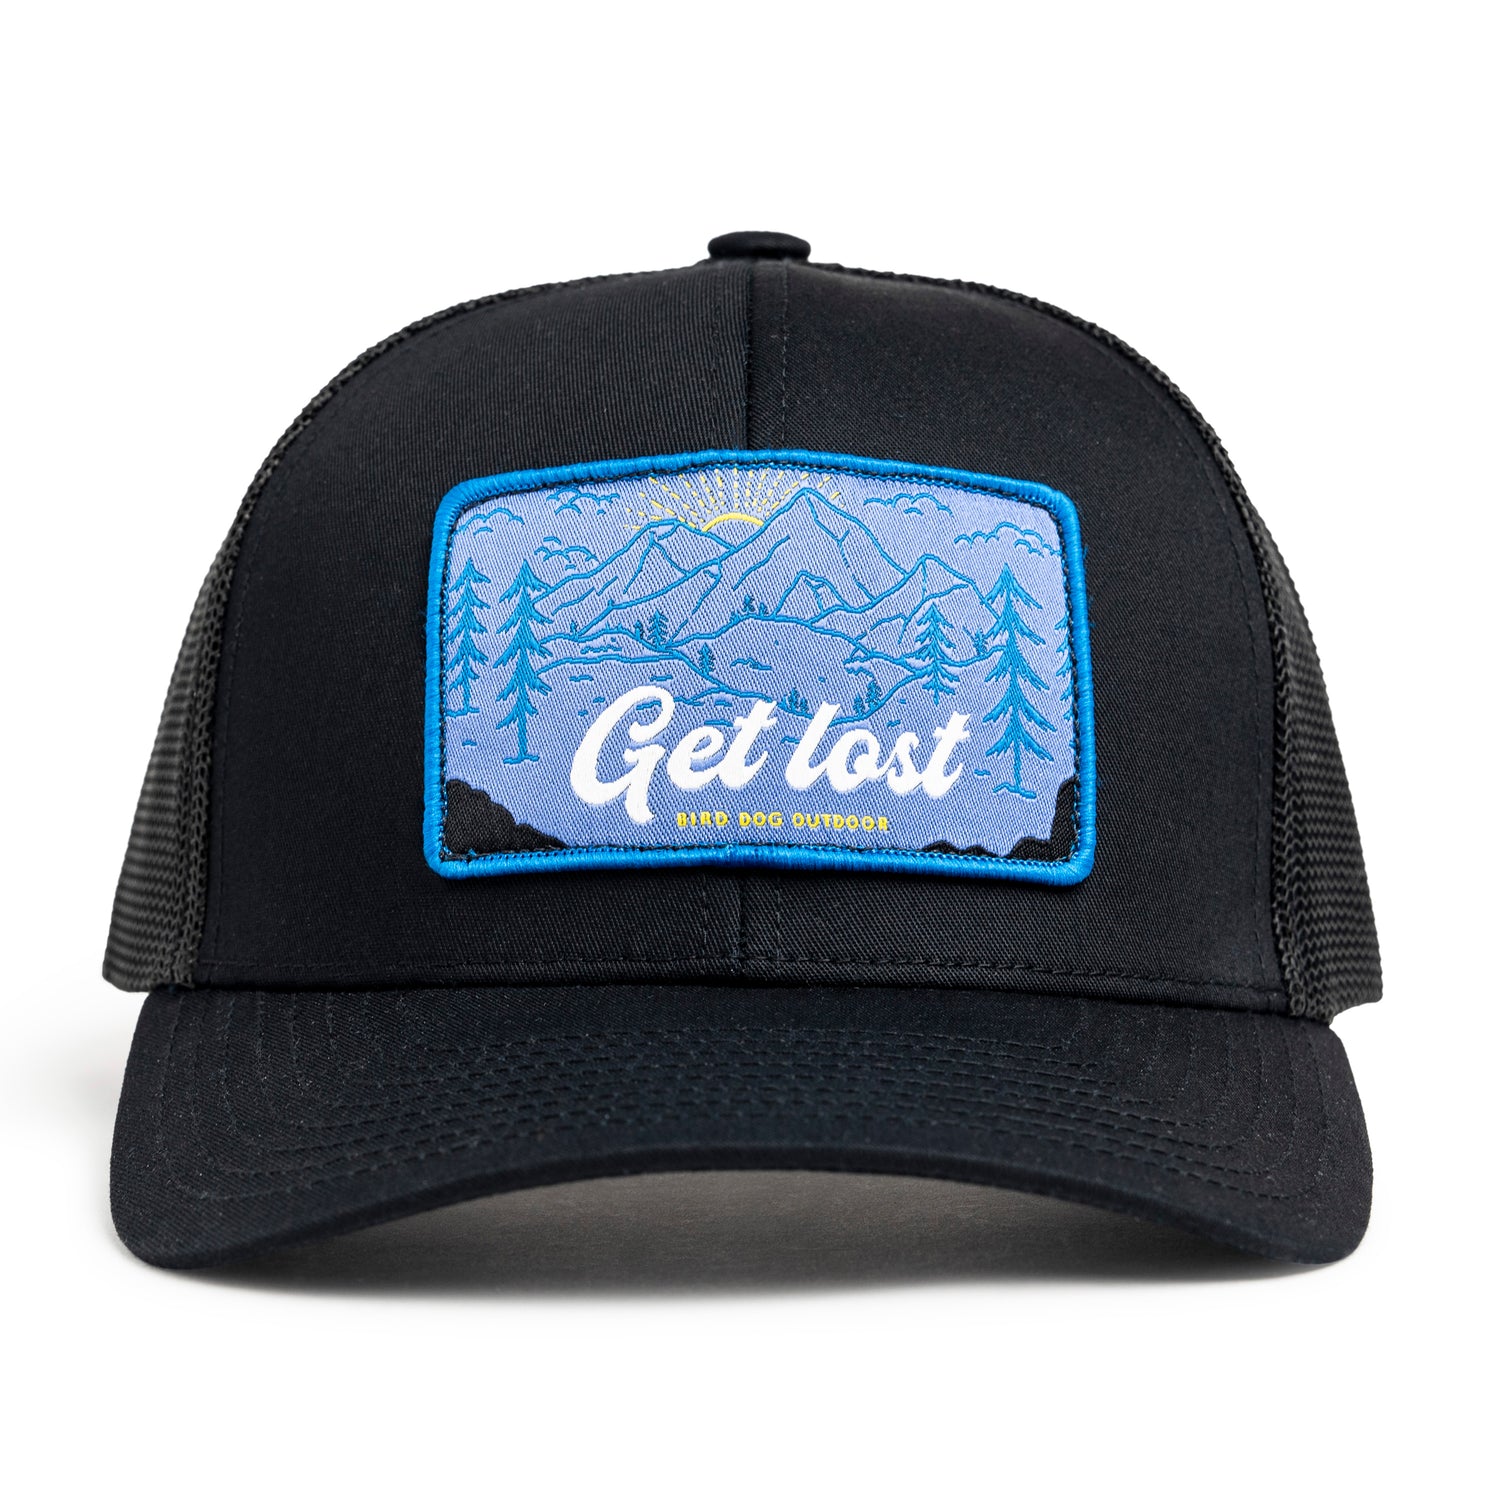 Get Lost Hat - New